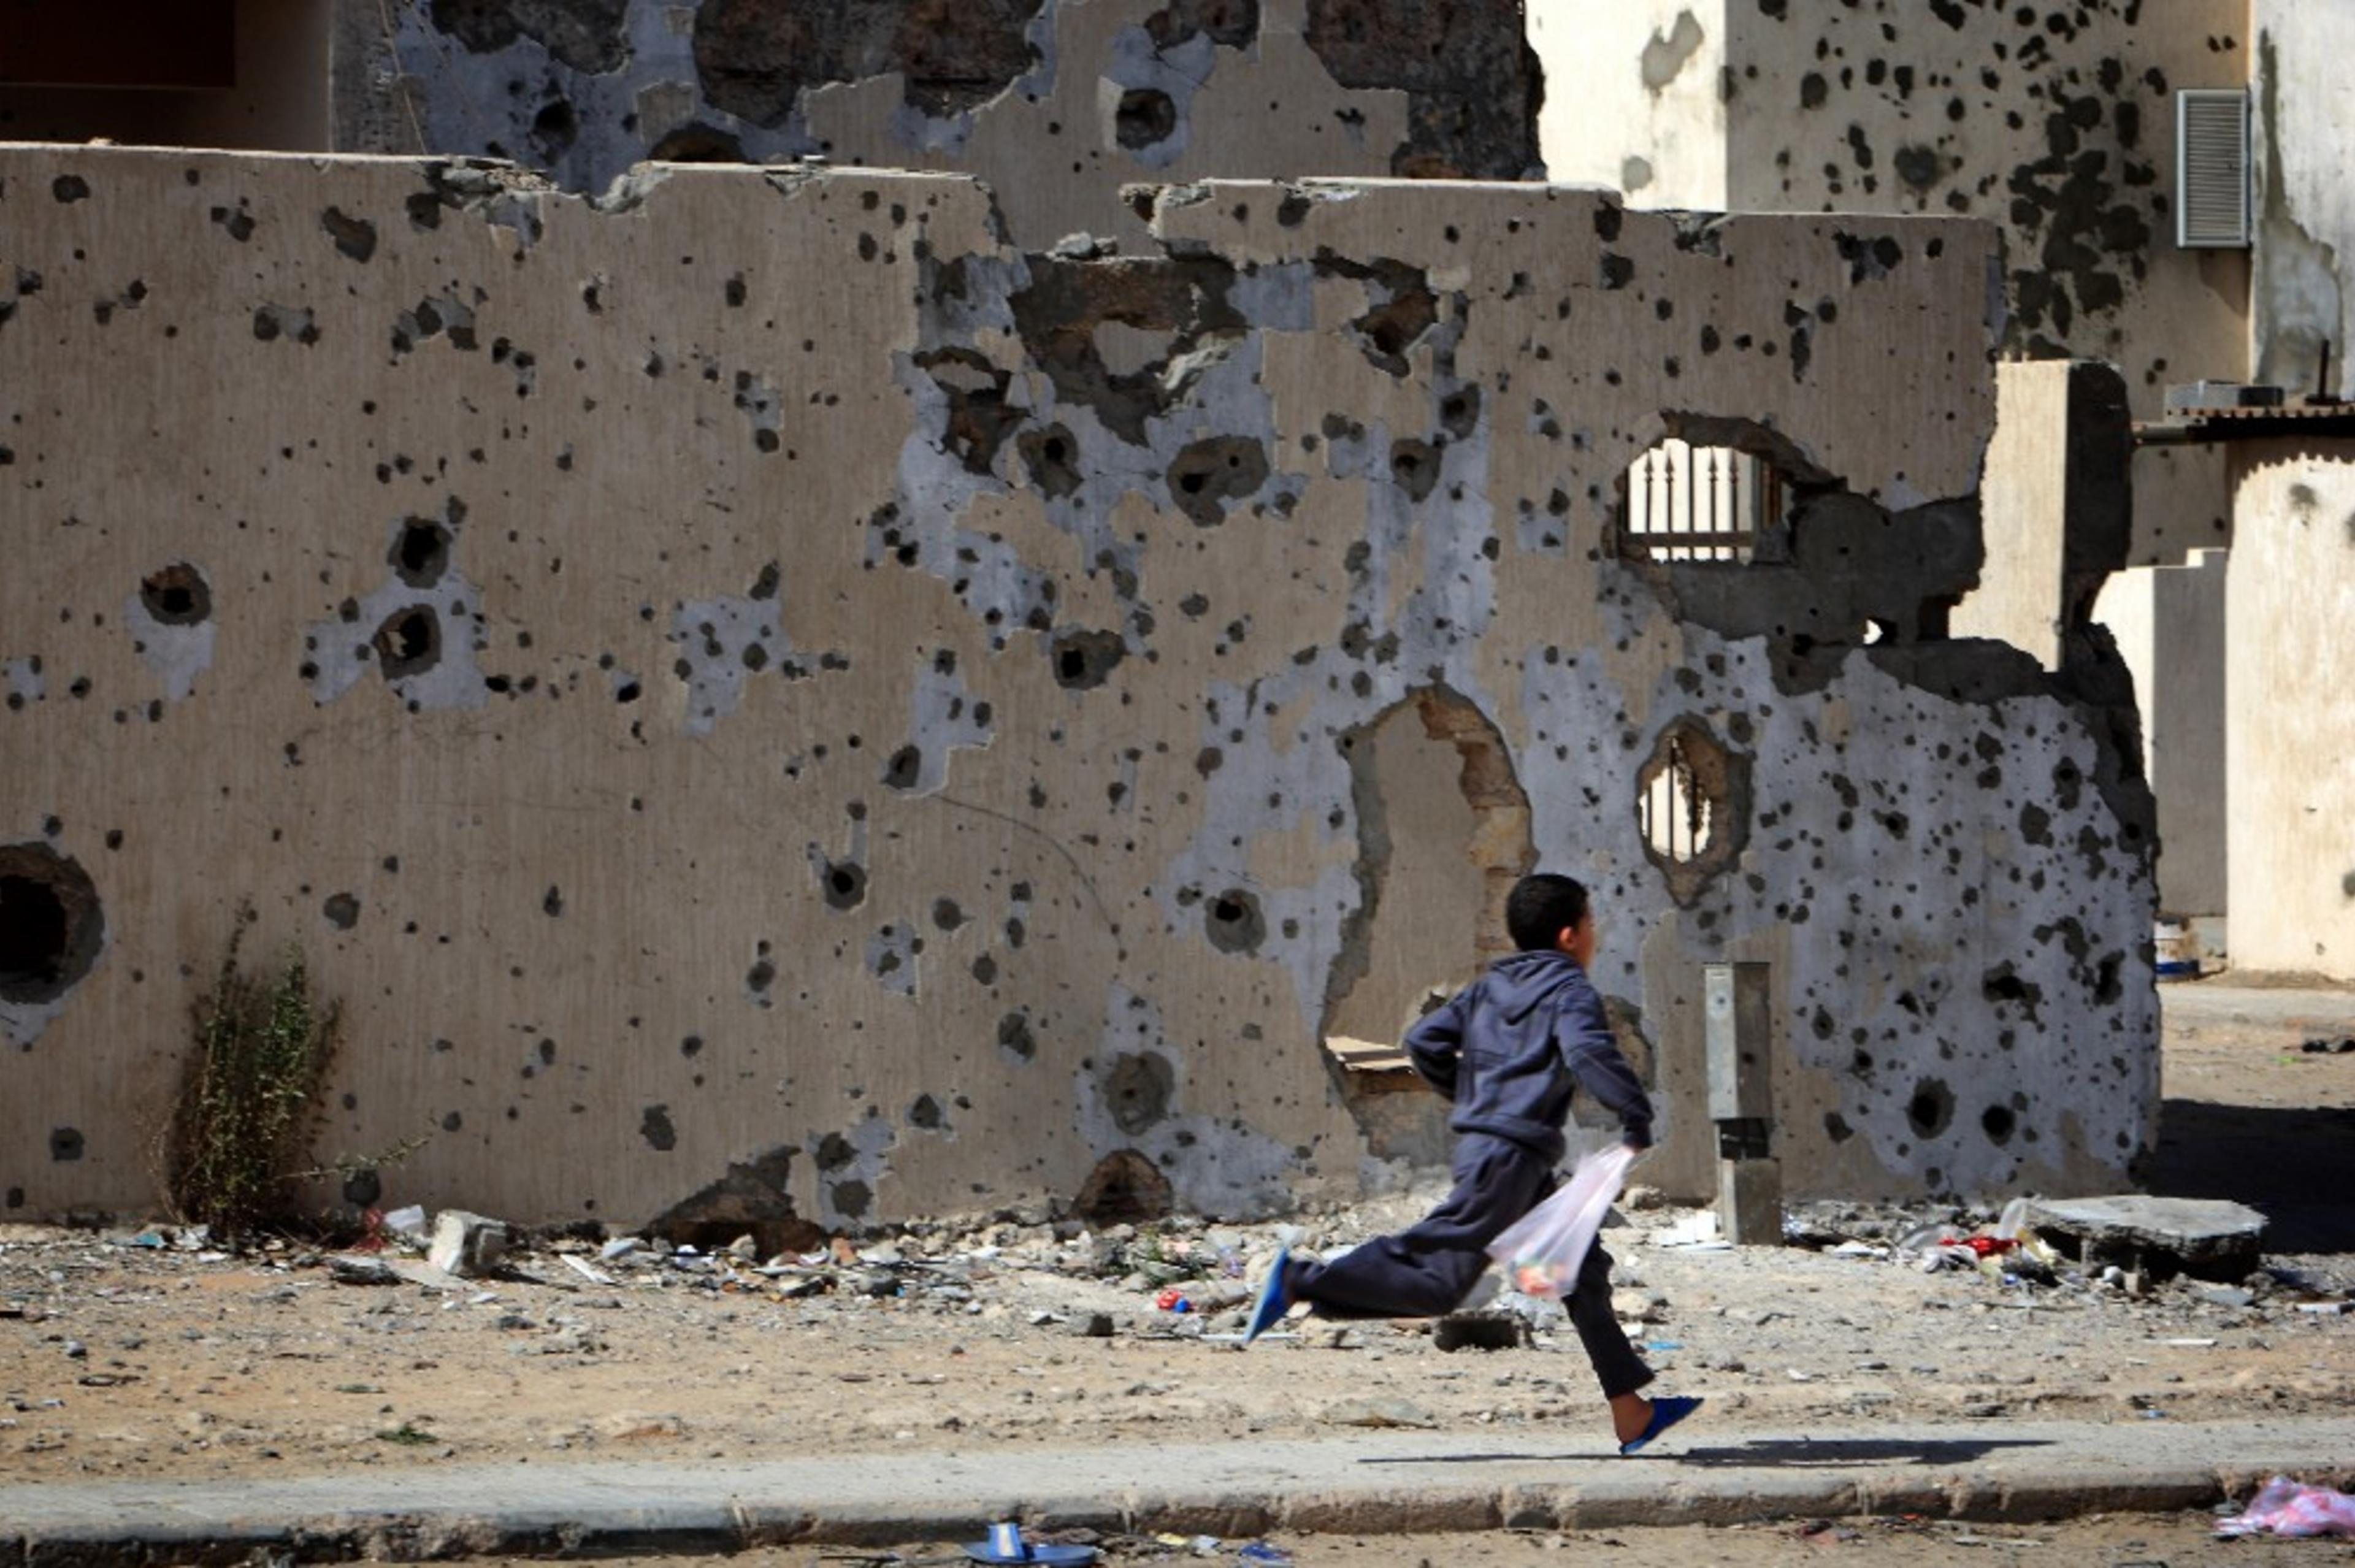 A child in Libya runs past damaged buildings on his way home from shopping